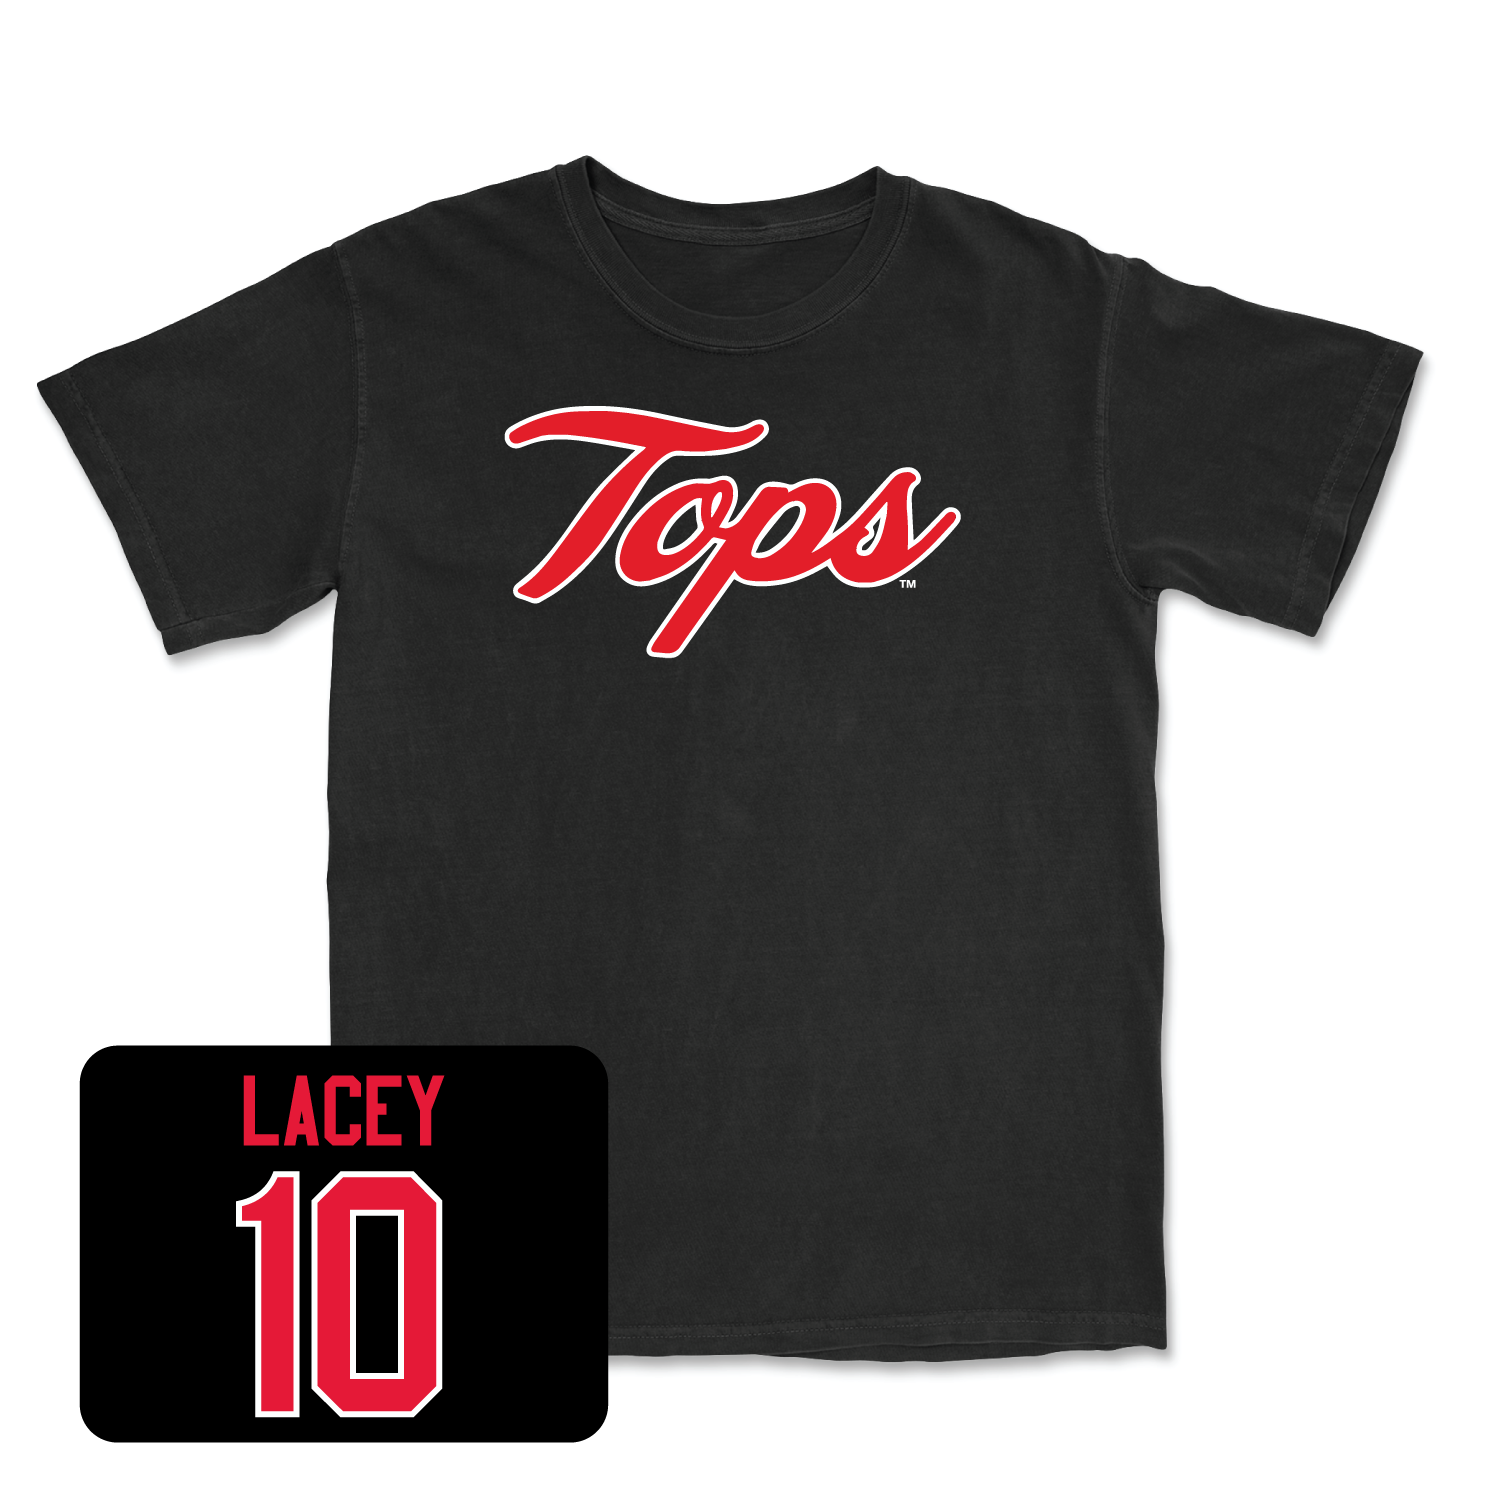 Black Women's Soccer Tops Tee 3 Small / Paige Lacey | #10